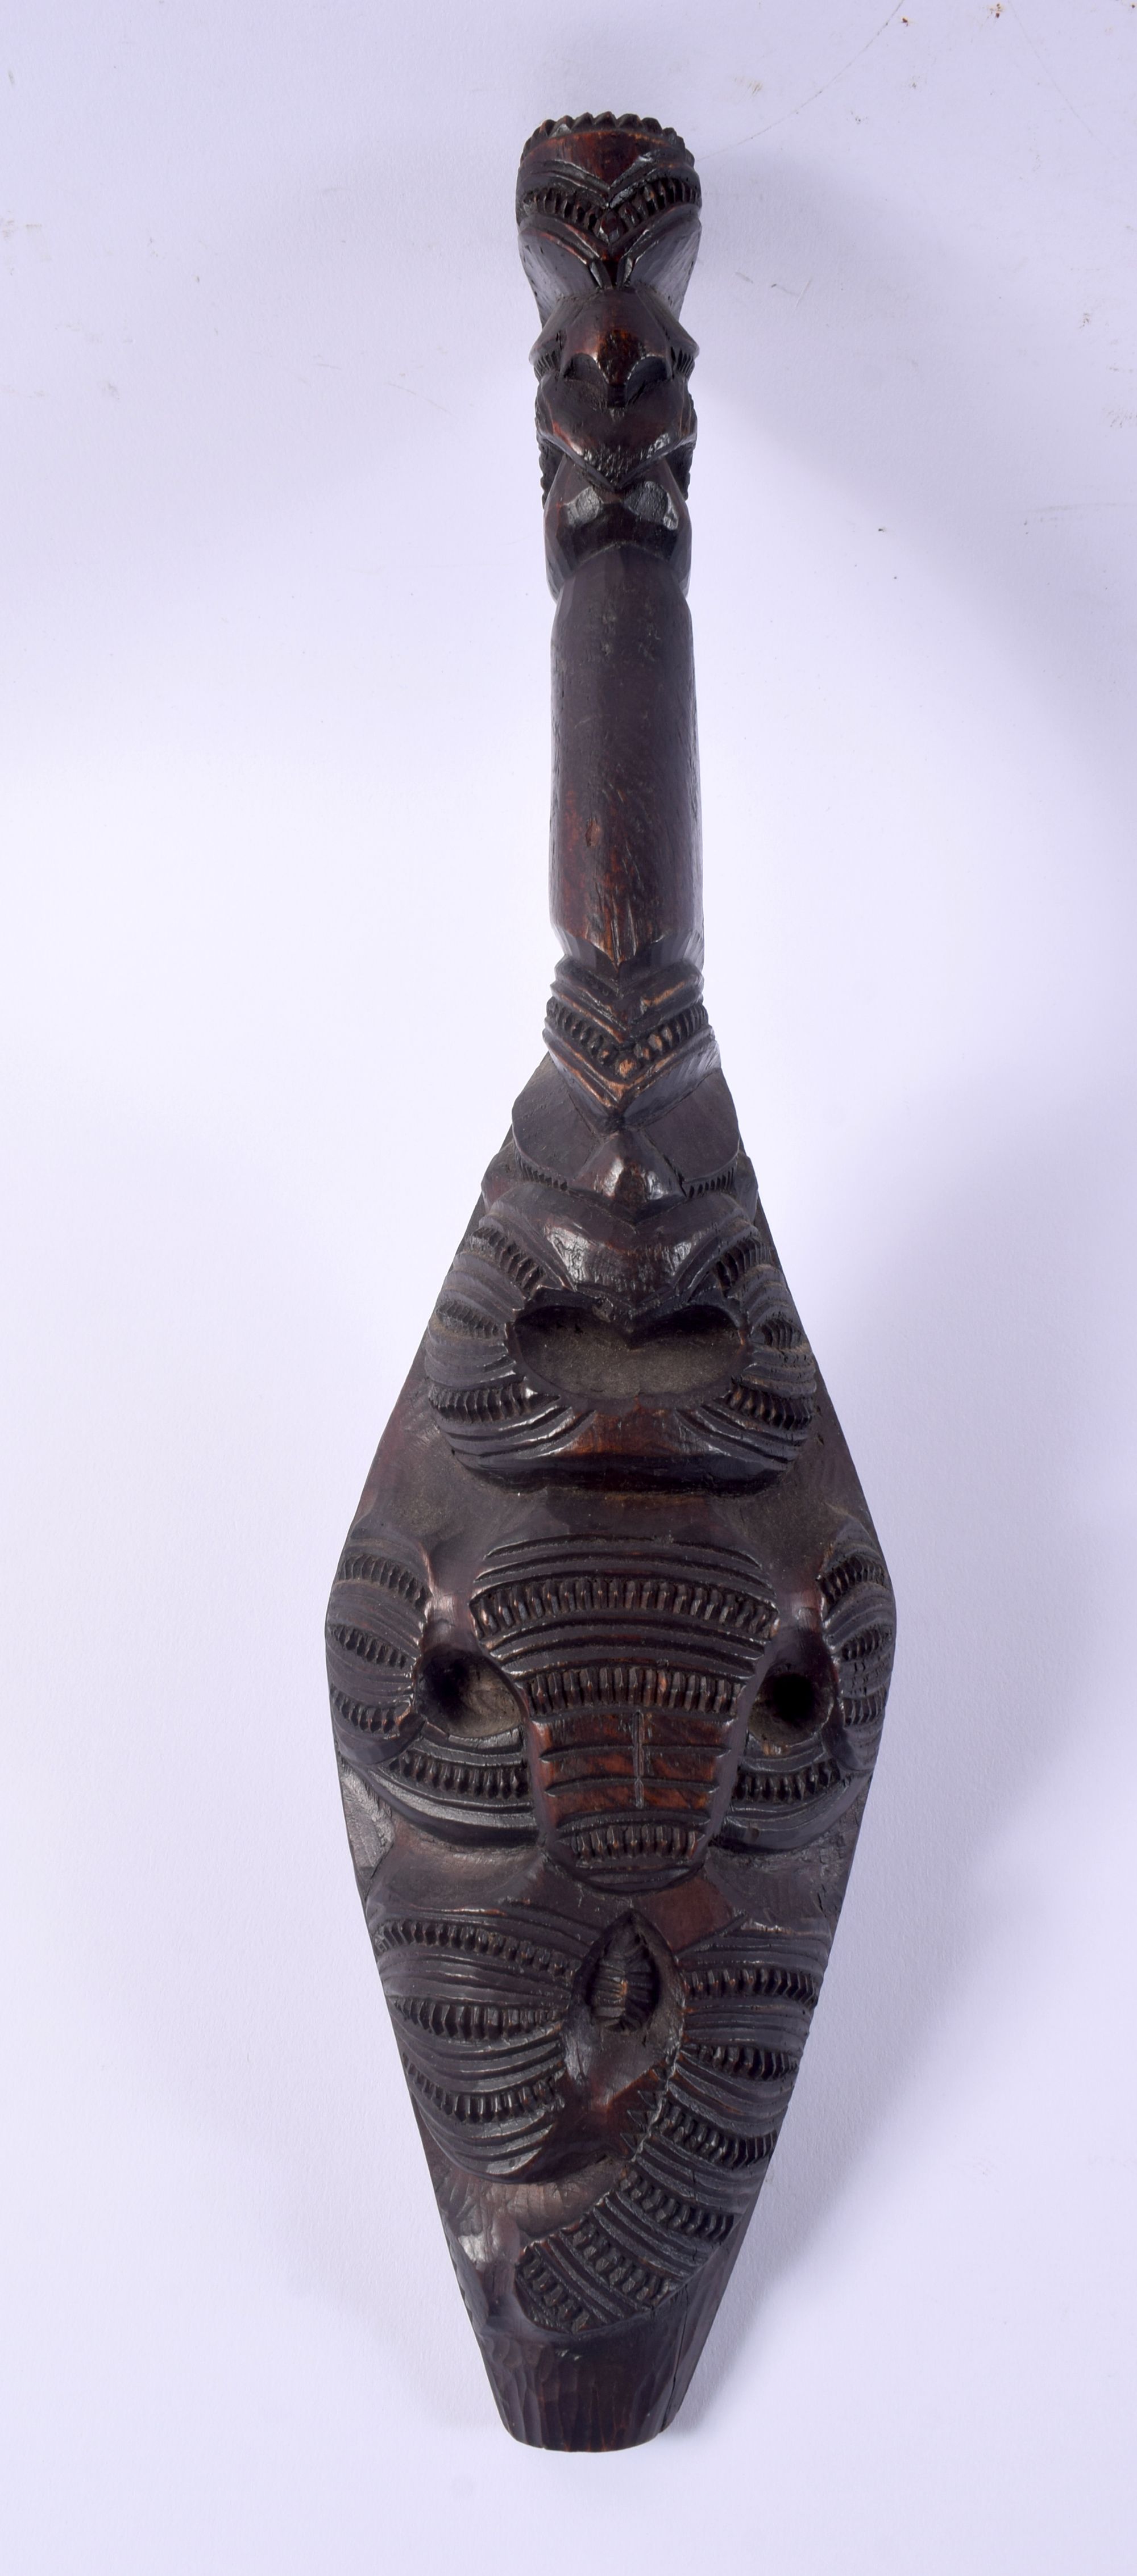 AN UNUSUAL EARLY 20TH CENTURY MAORI TRIBAL NEW ZEALAND CARVED WOOD CLUB possibly a Wahaiki, with fla